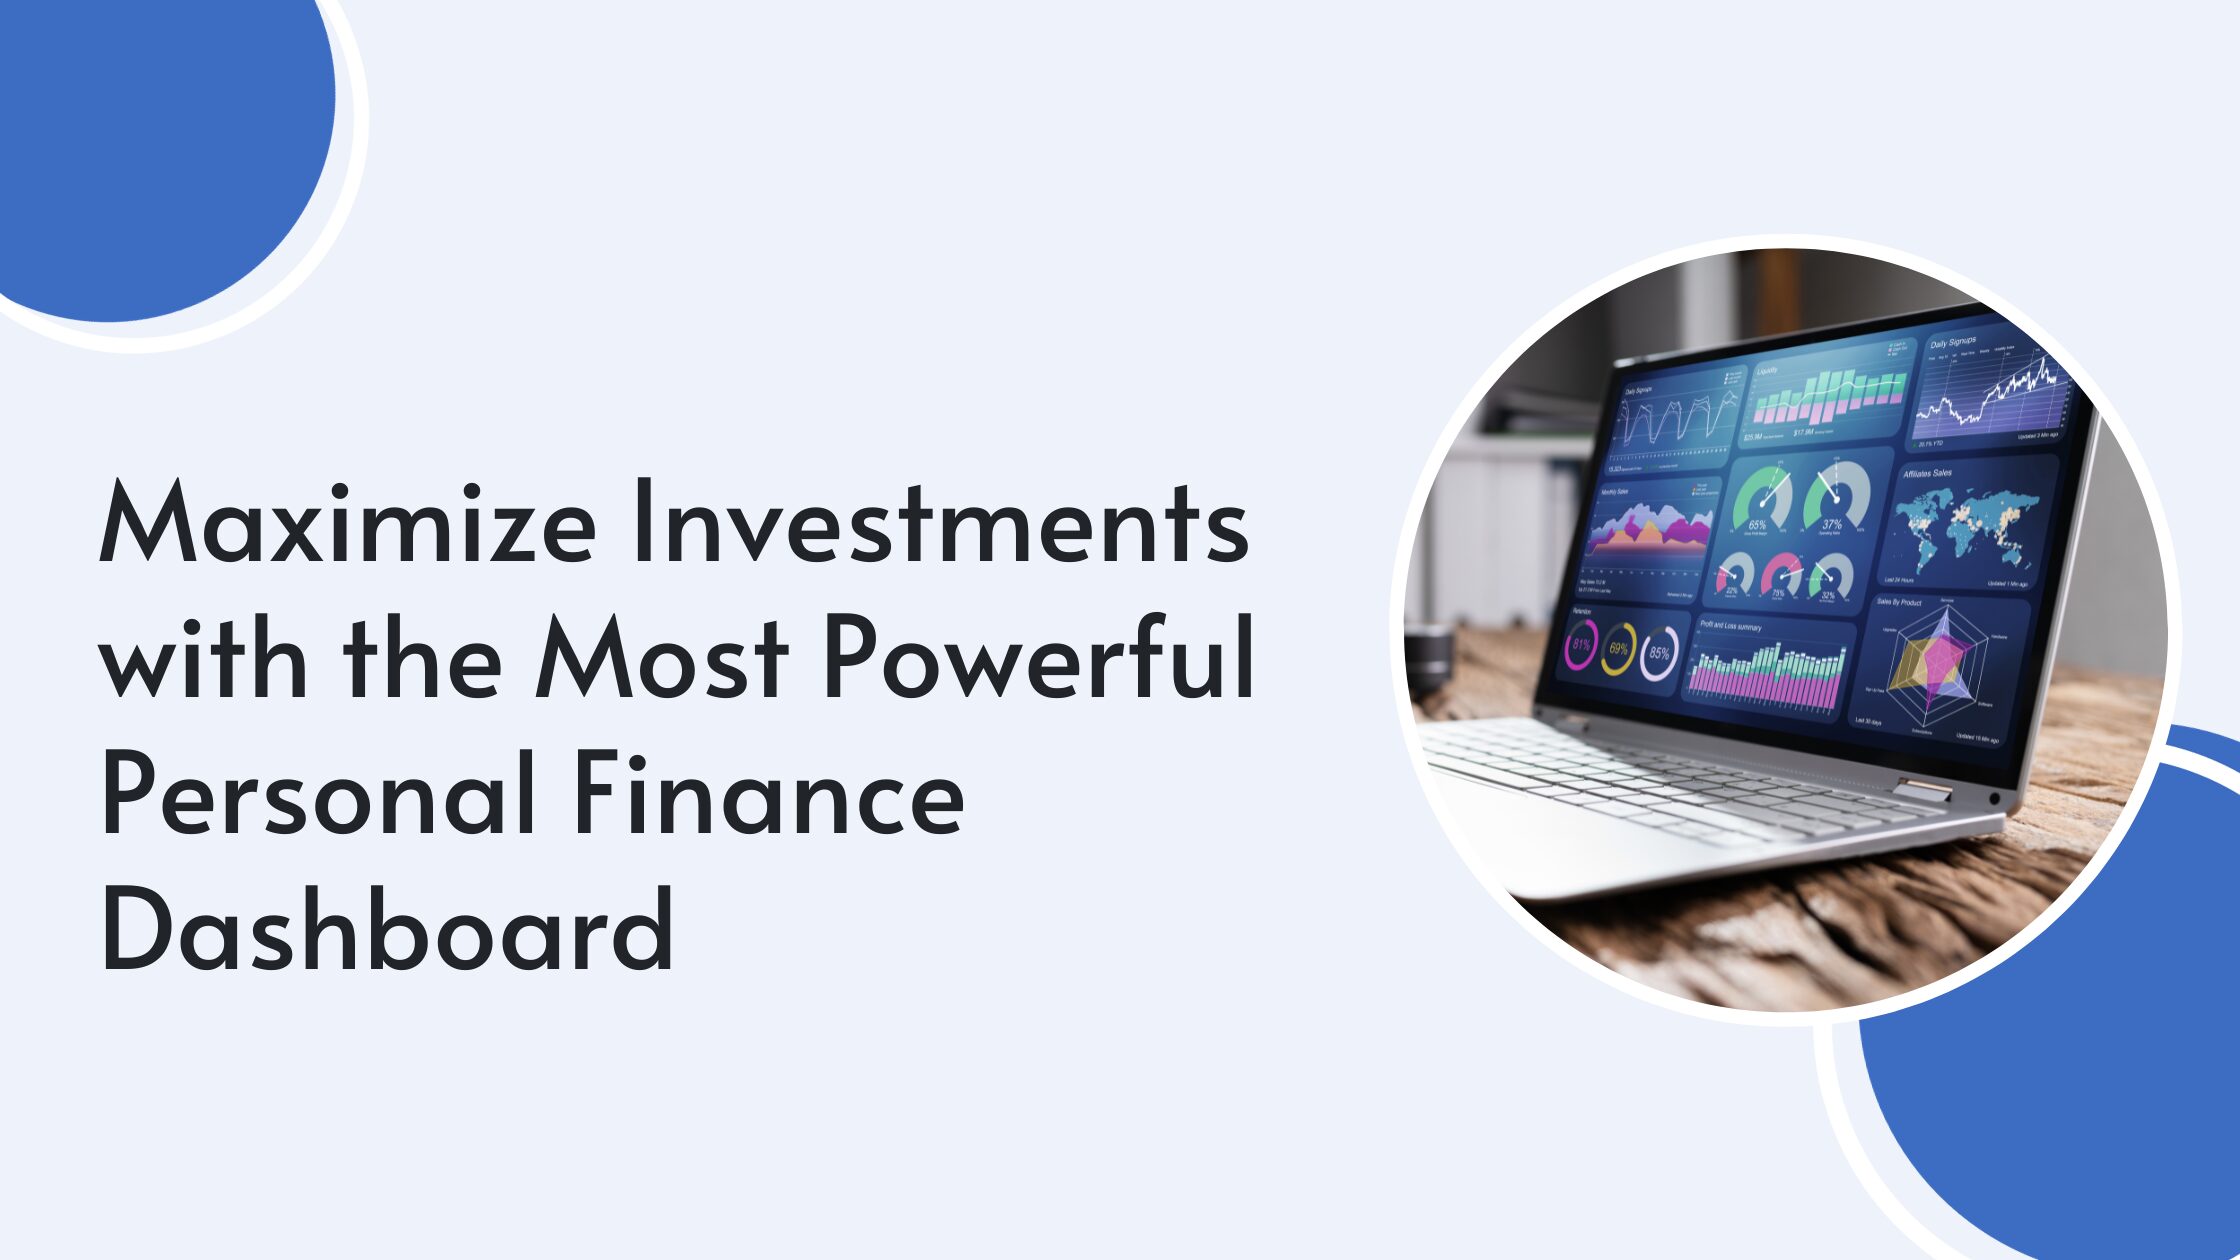 Maximize Investments with the Most Powerful Personal Finance Dashboard